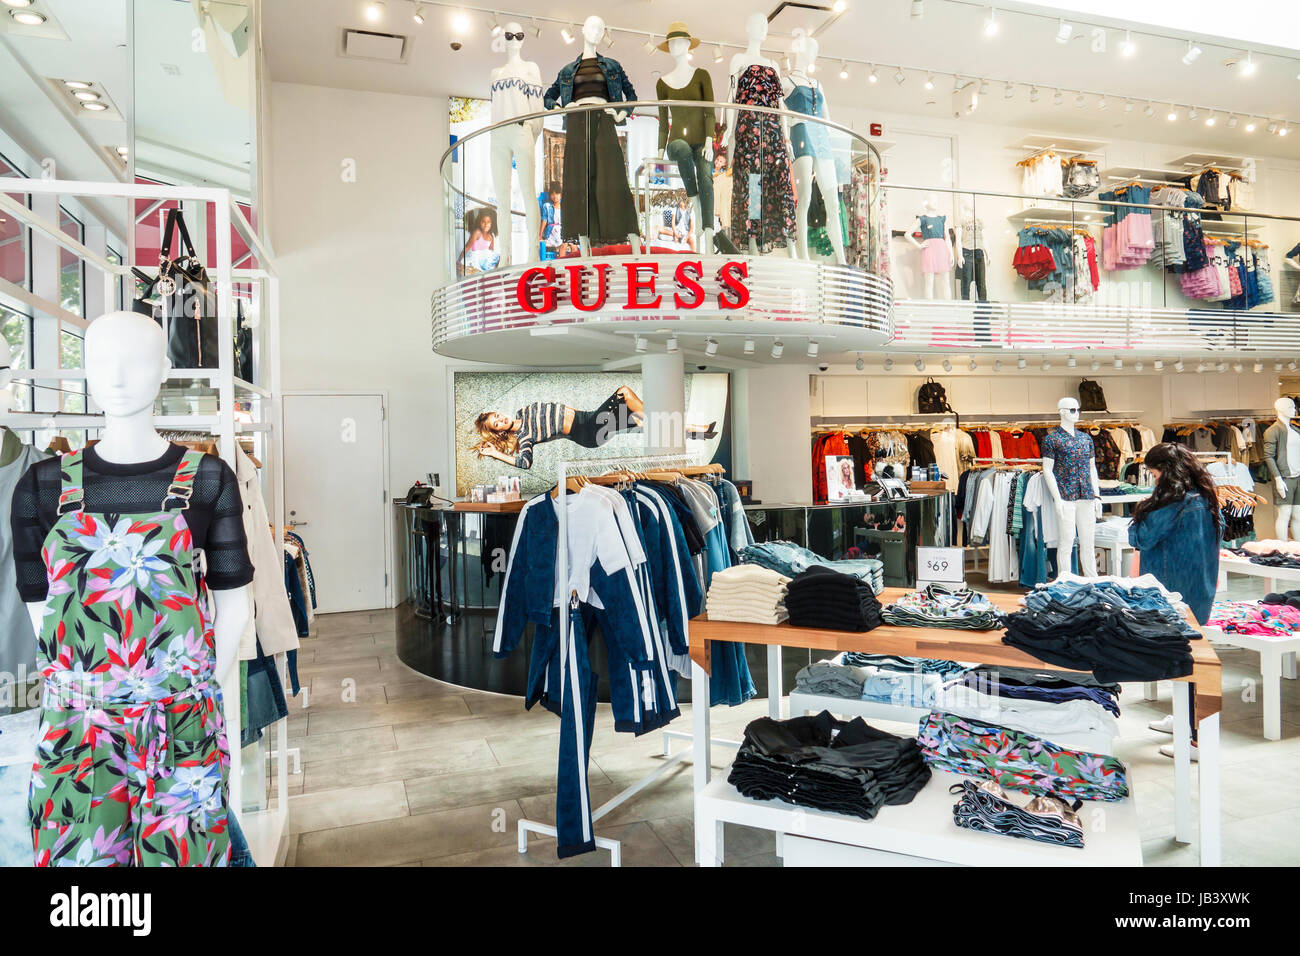 Page 2 - Guess Shop High Resolution Stock Photography and Images - Alamy